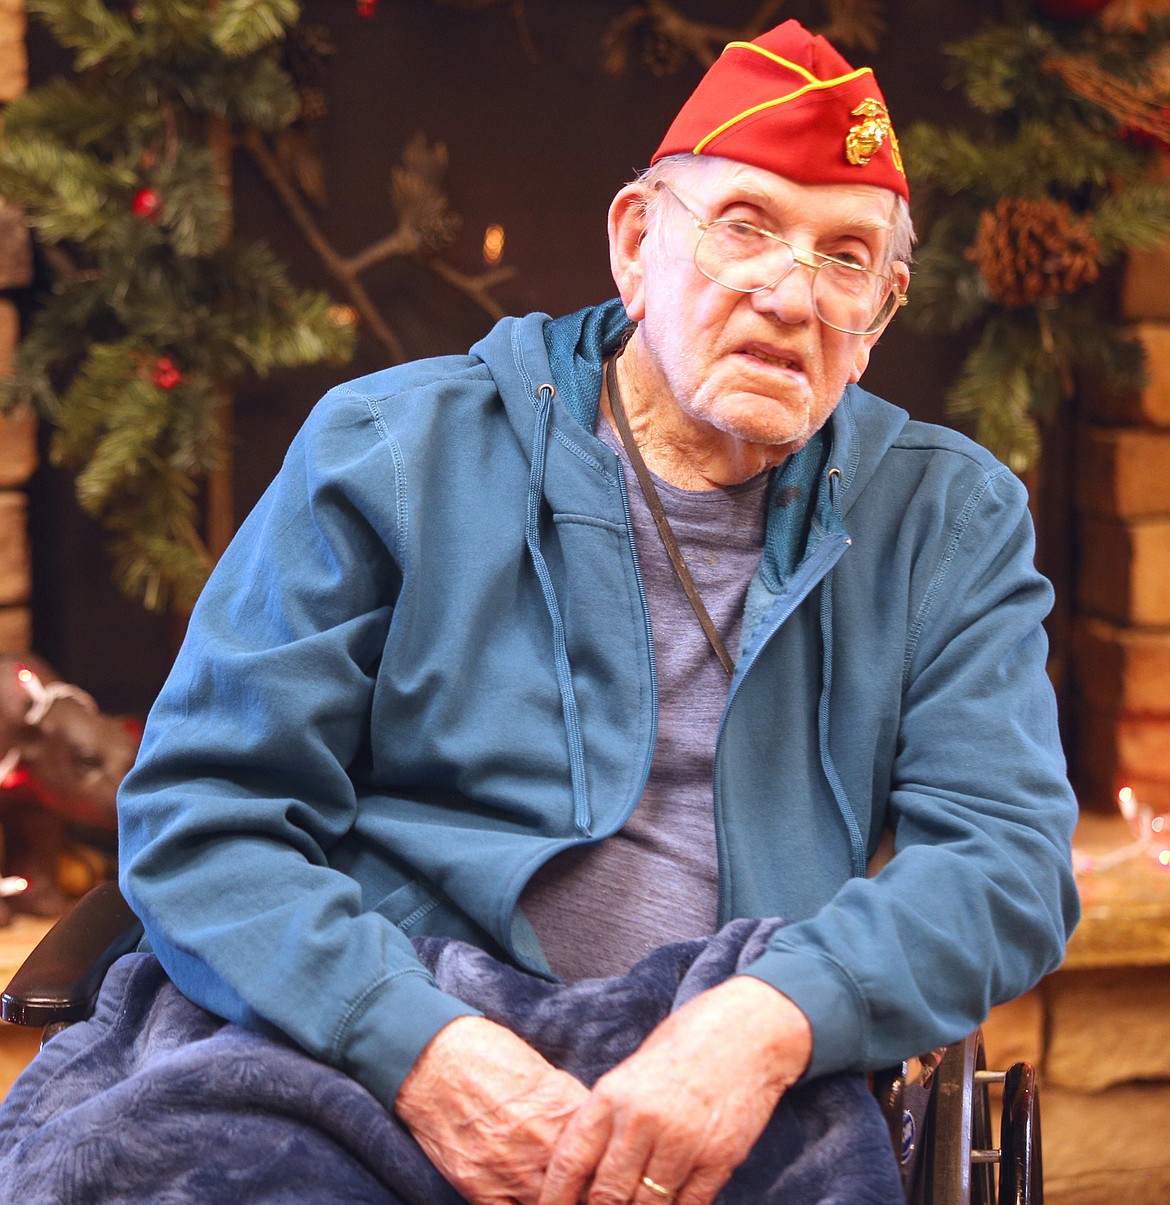 Howard Rieckers, 99, served four years with the Marines in the South Pacific. He spoke Monday with The Press about his experience in World War II.